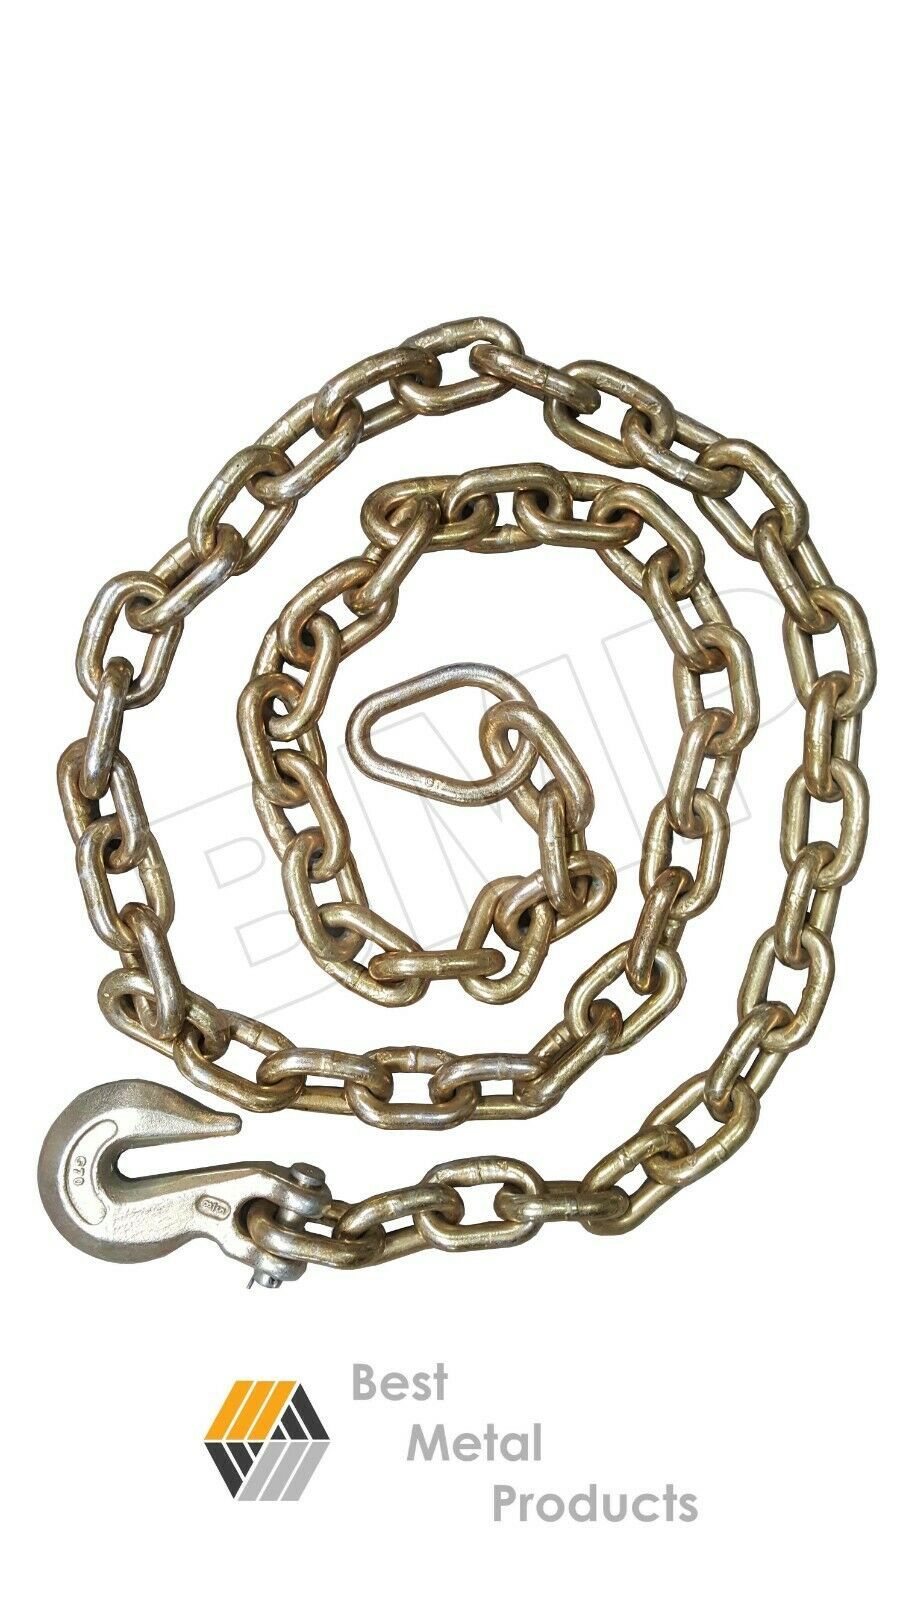 Primary image for 5/8" x 10 ft Tow Chain with Hooks Tie Down Binder Trailer Flatbed Safety G70 148